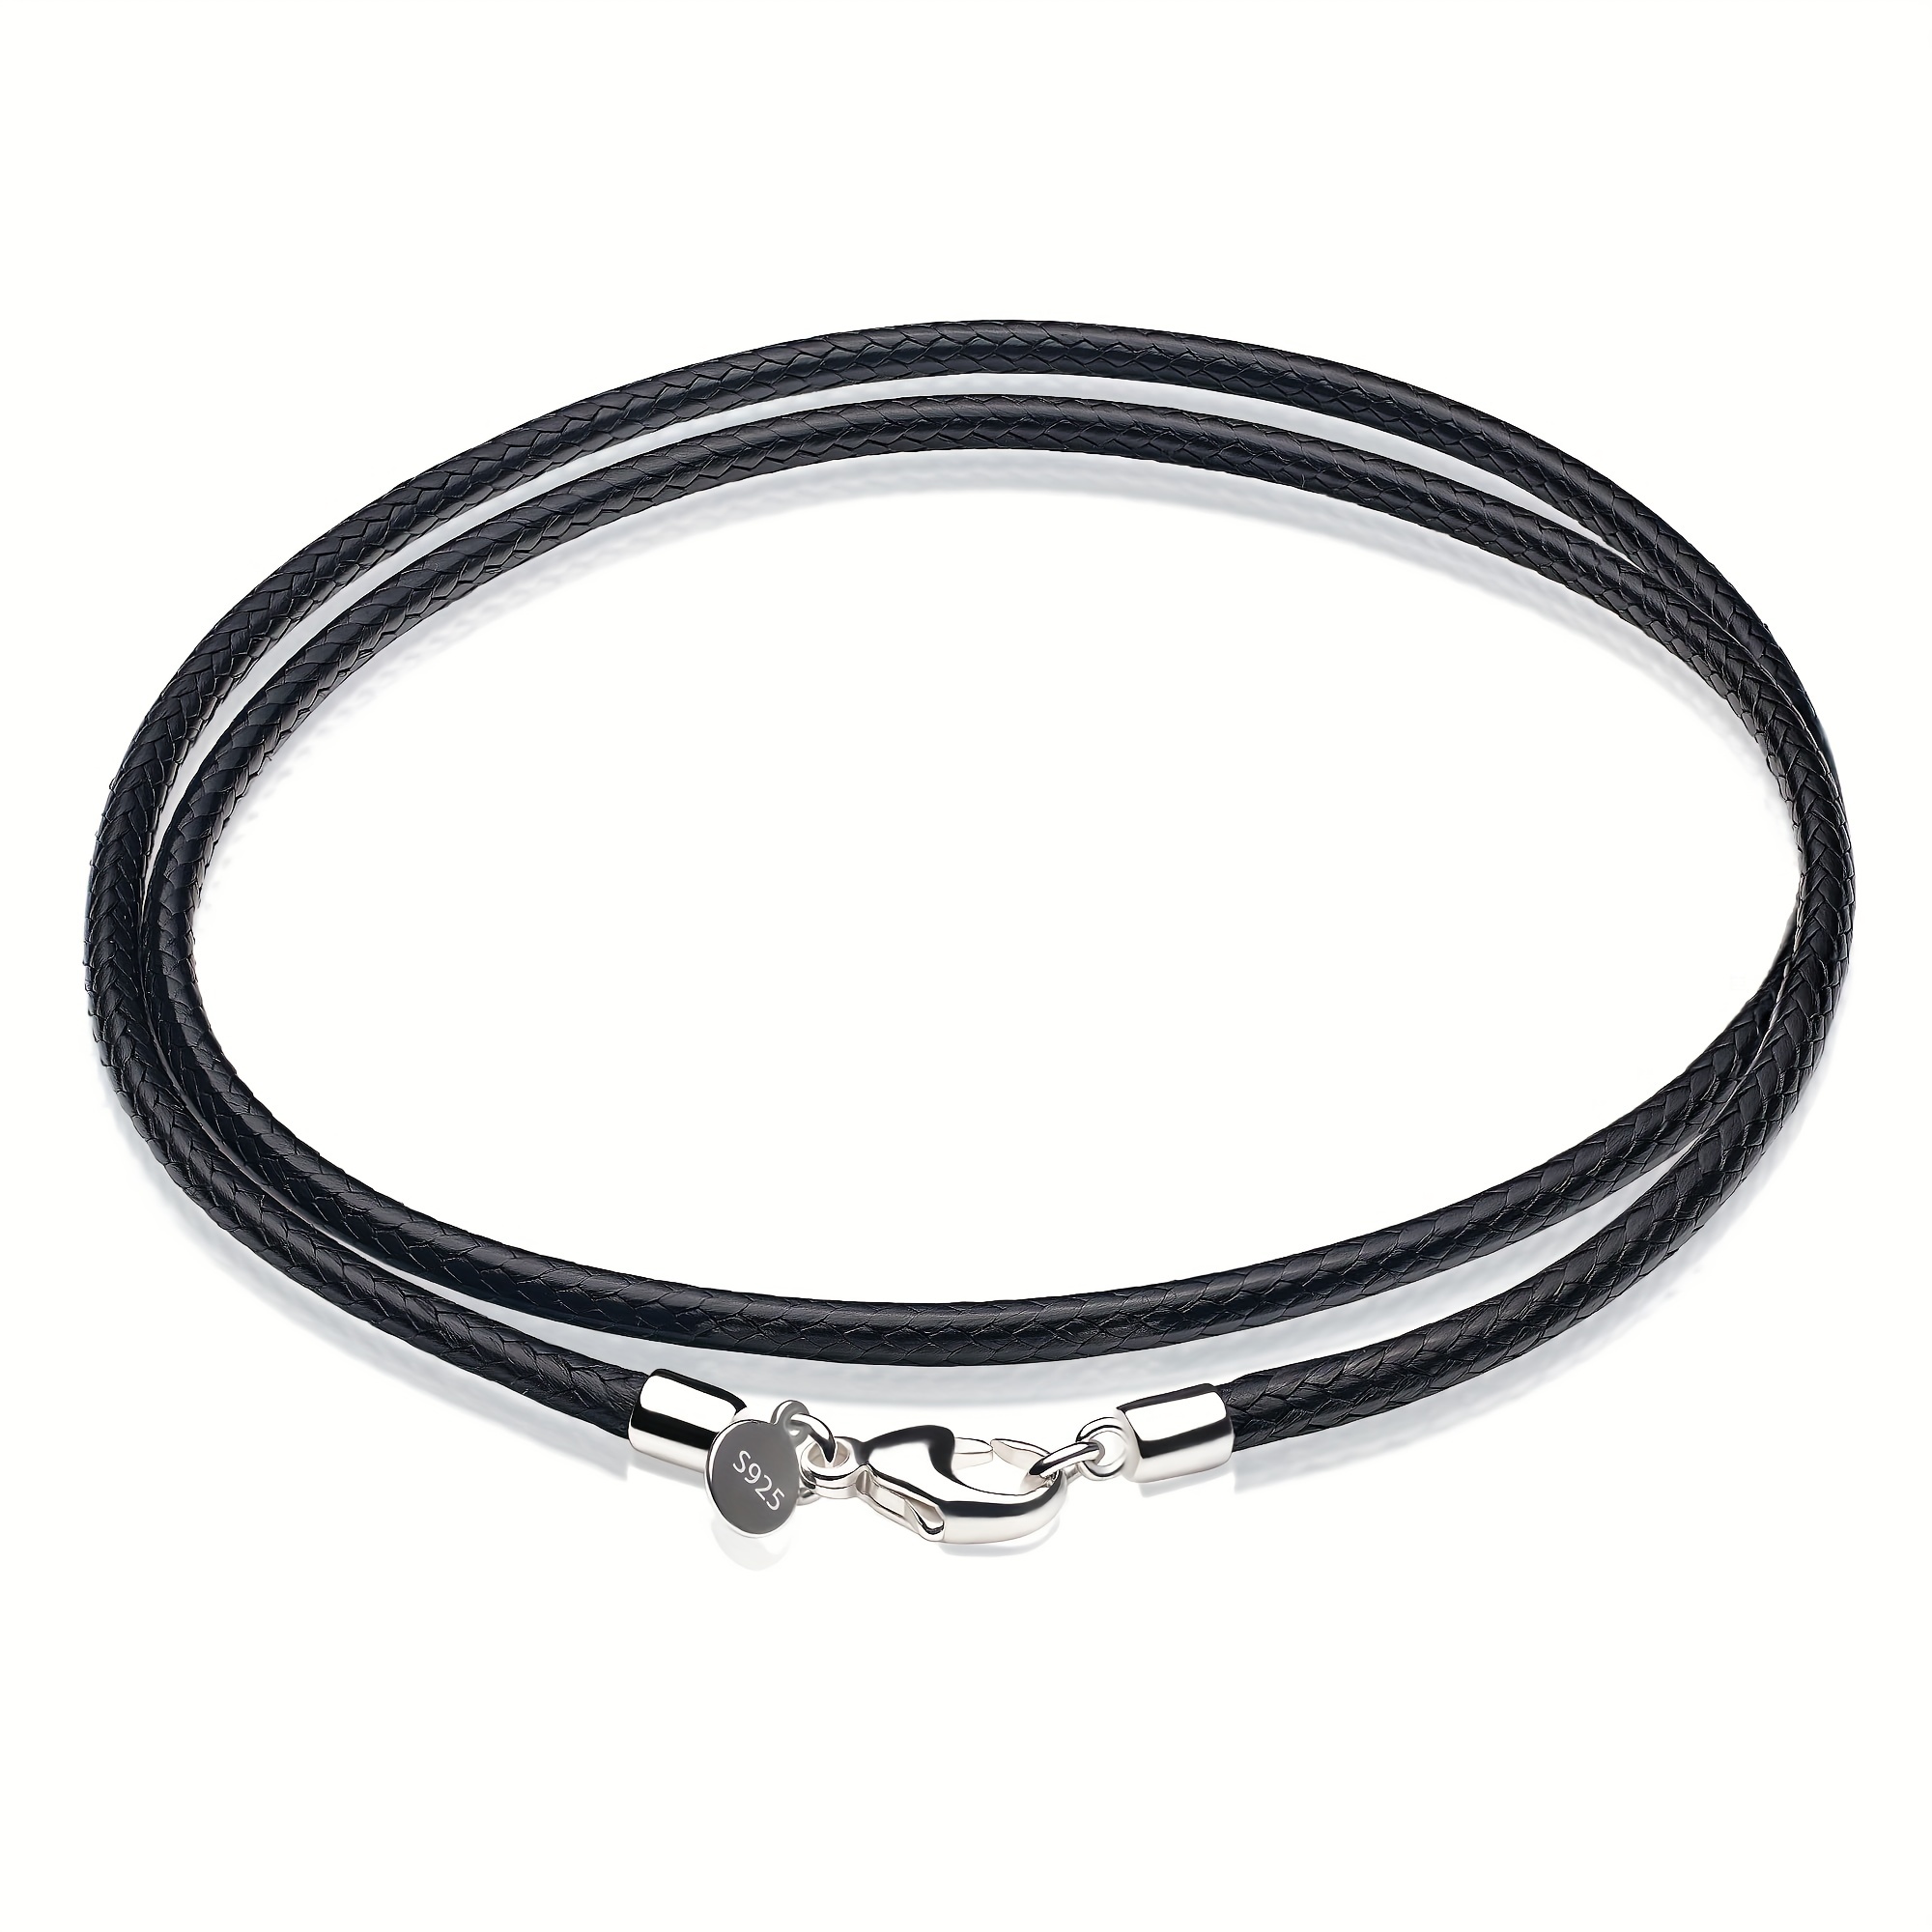 2mm Black Round Leather Cord Necklace W/ Silver Lobster Clasp Length 13,  14, 15, 16, 18, 20, 22, 24, 27, 30 One or Set of Five 